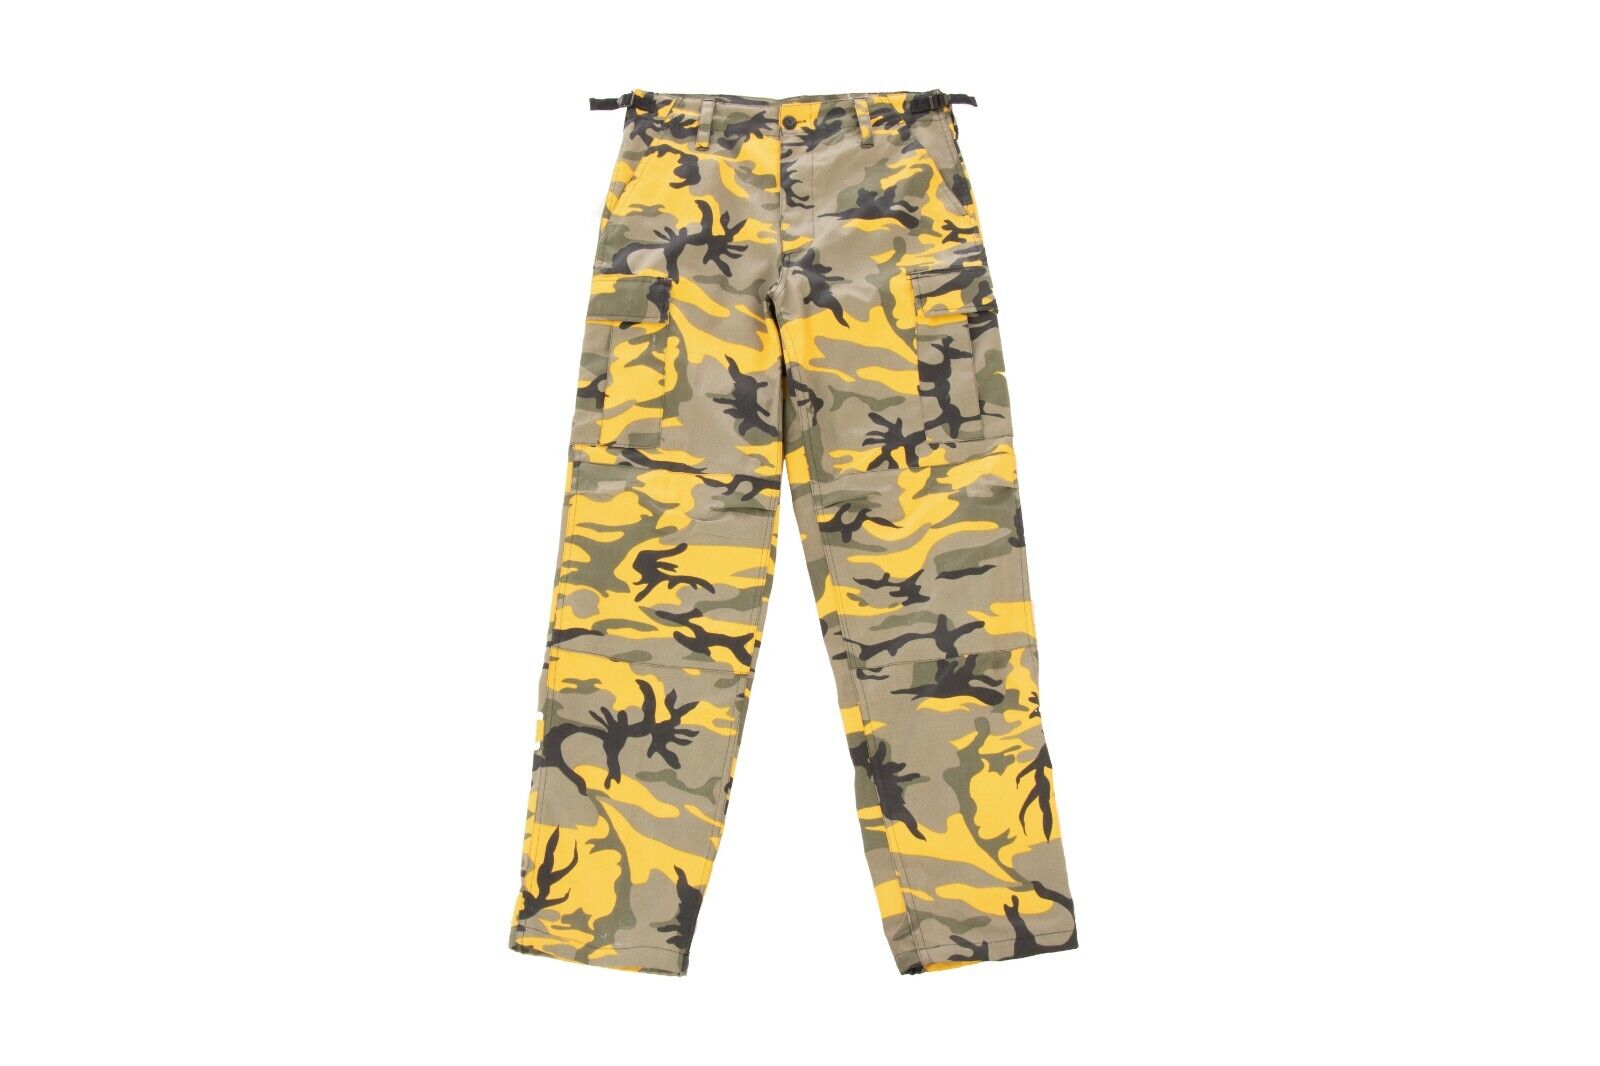 Army Style High Vis Yellow Camo Combat Trouser Cargo Pants BDU Work Outdoor